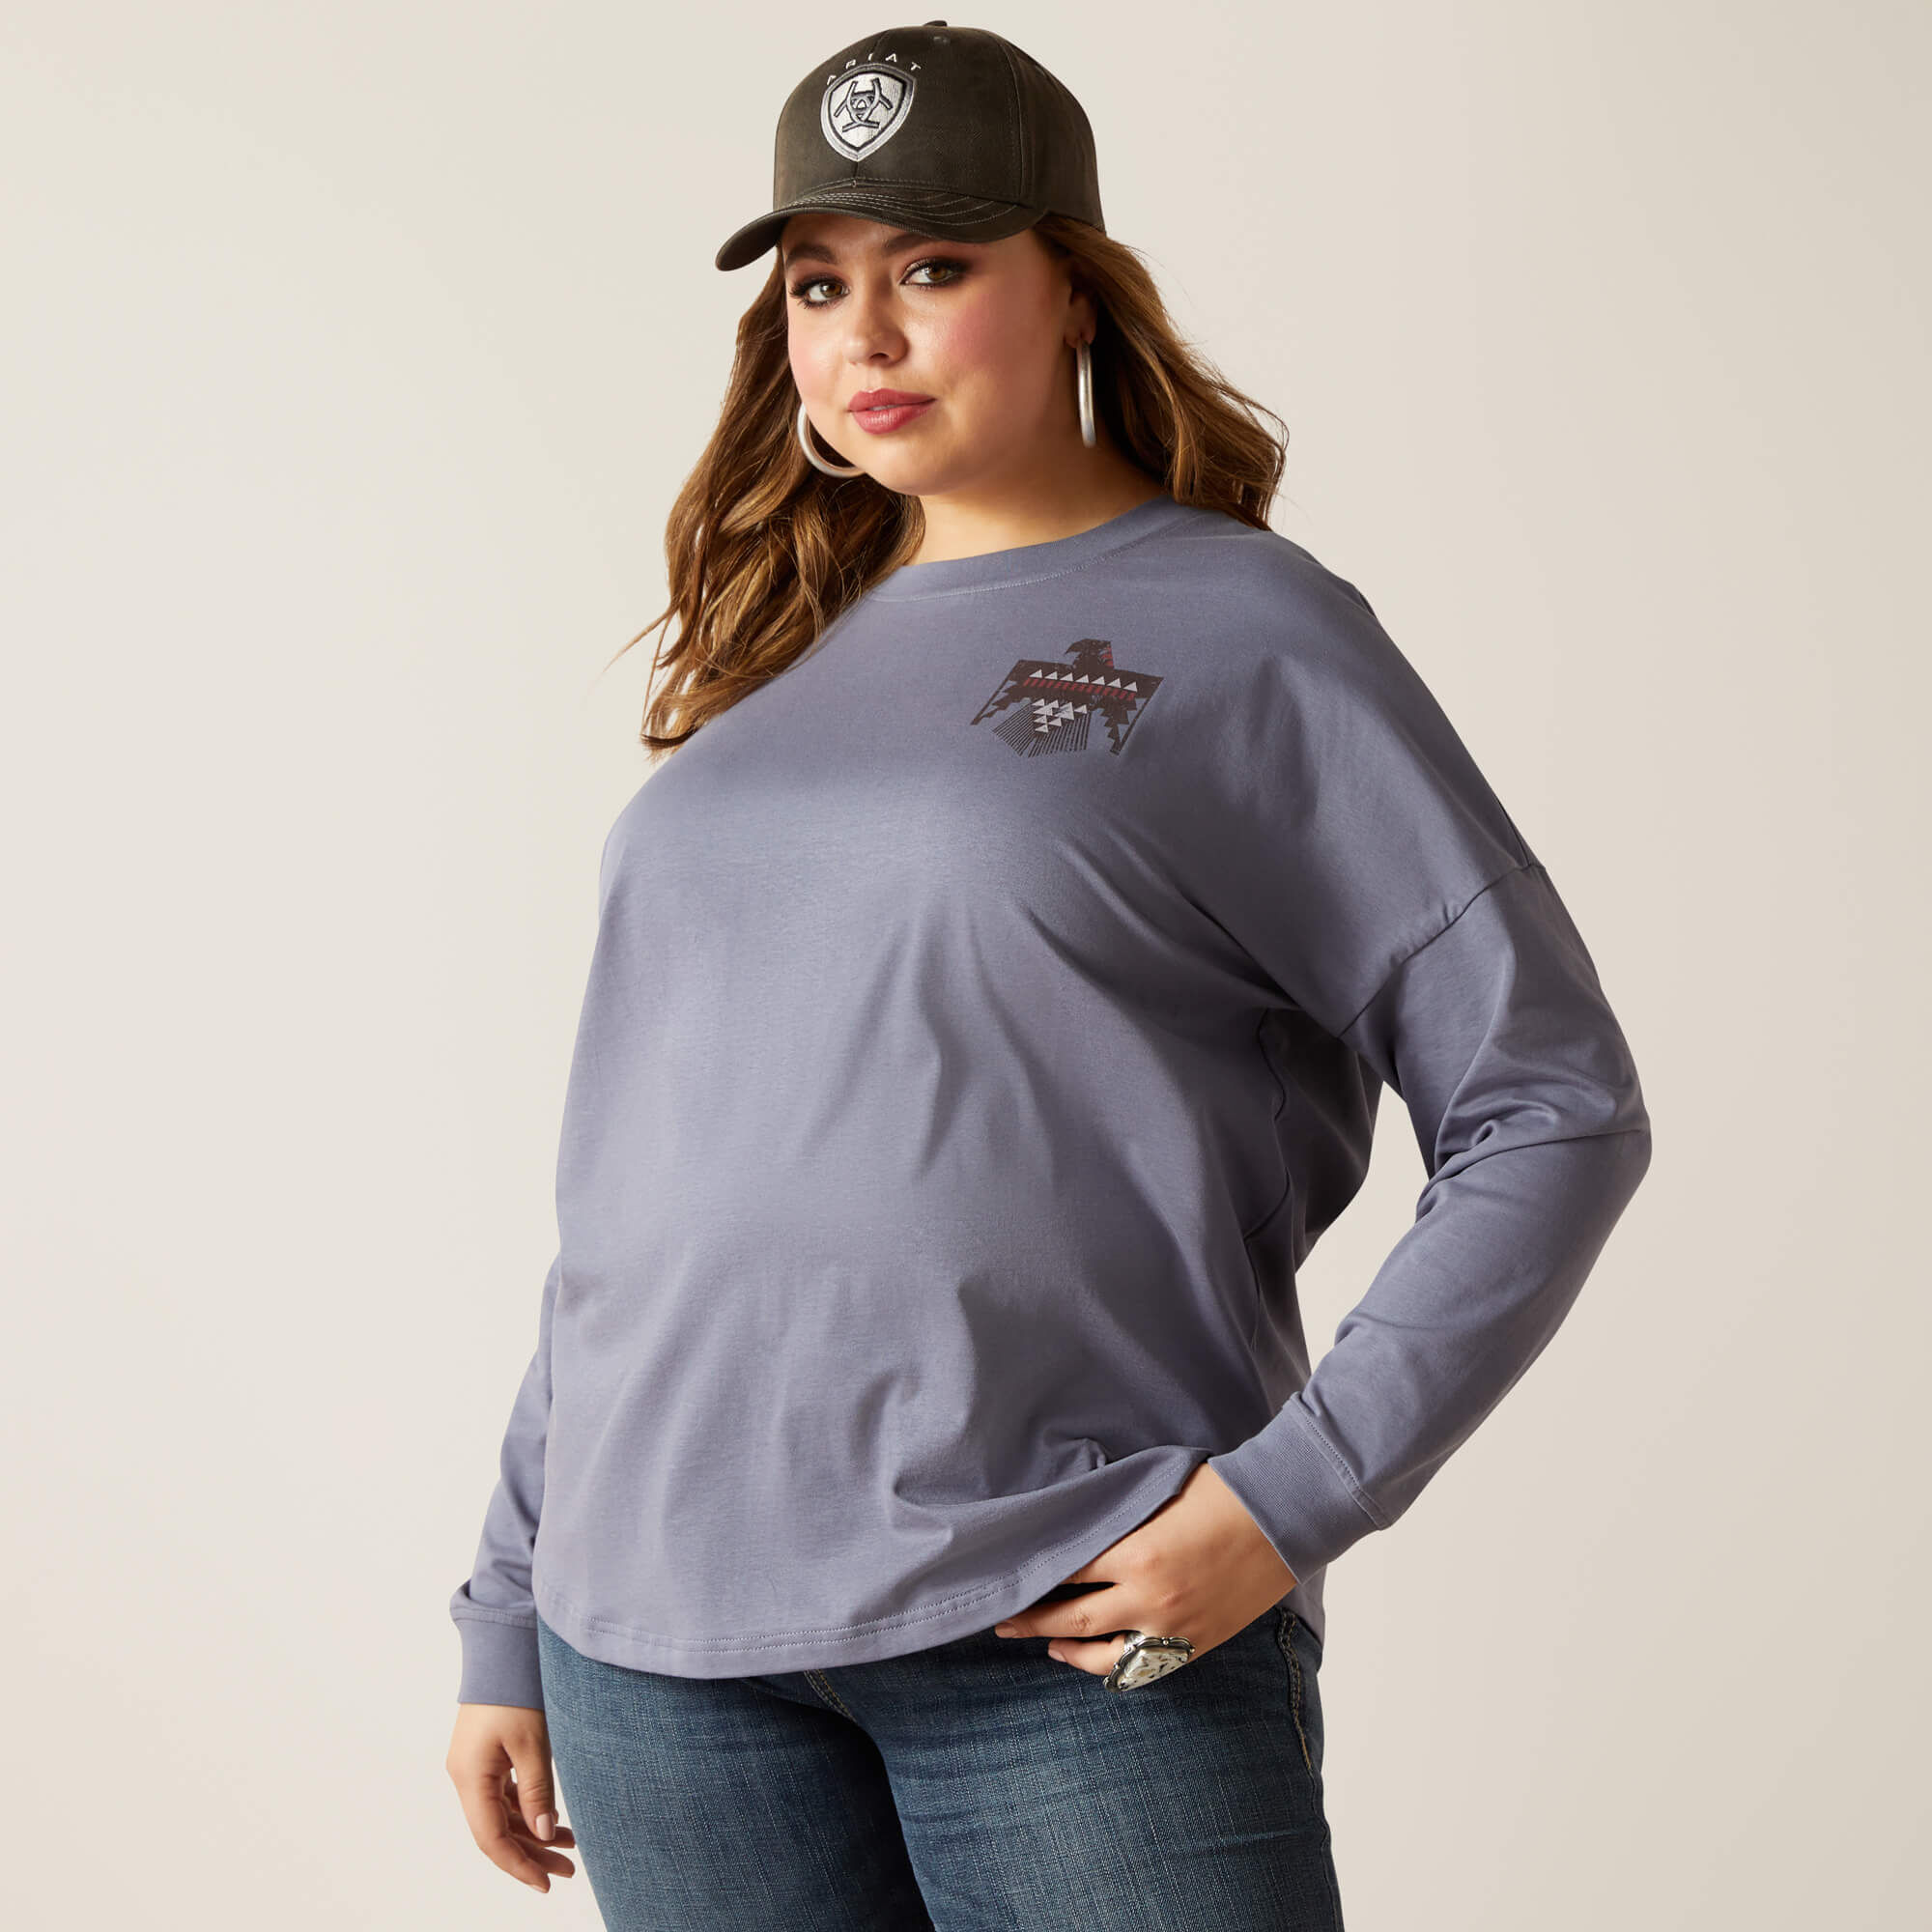 Women's Thunderbird T-Shirt in Folkstone Grey, Size: Large by Ariat